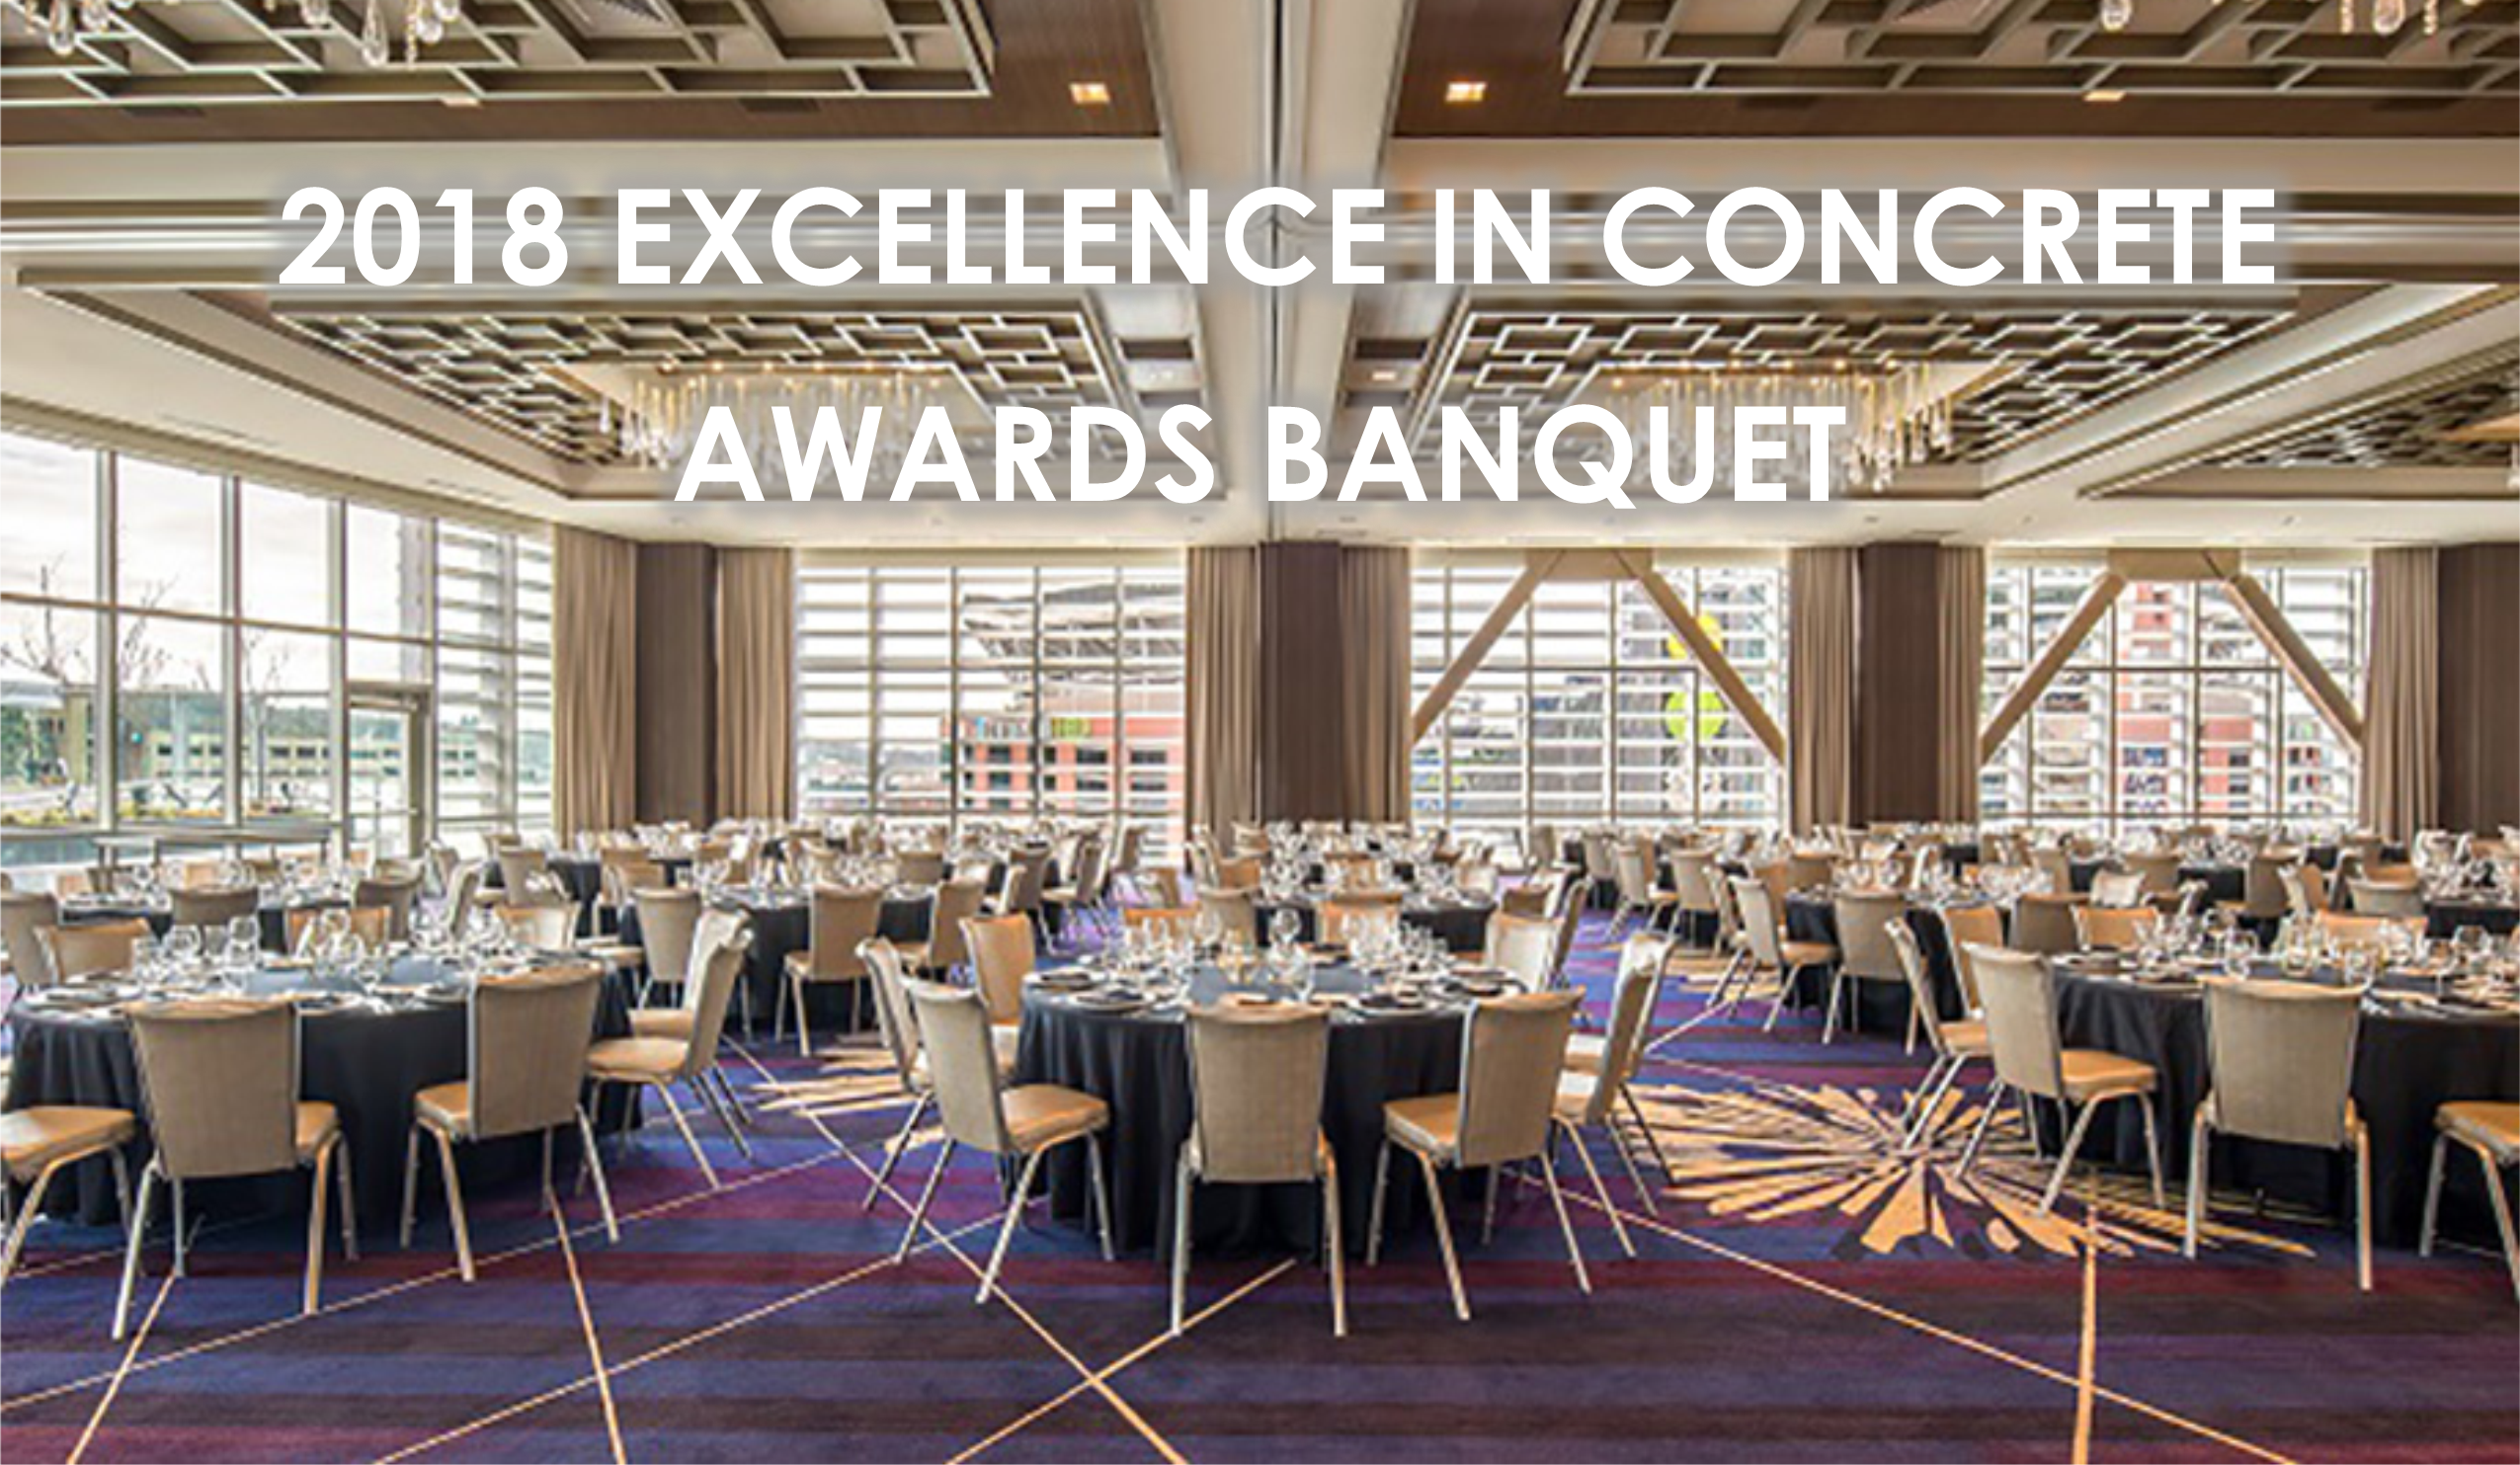 2018 Excellence in Concrete Awards Banquet